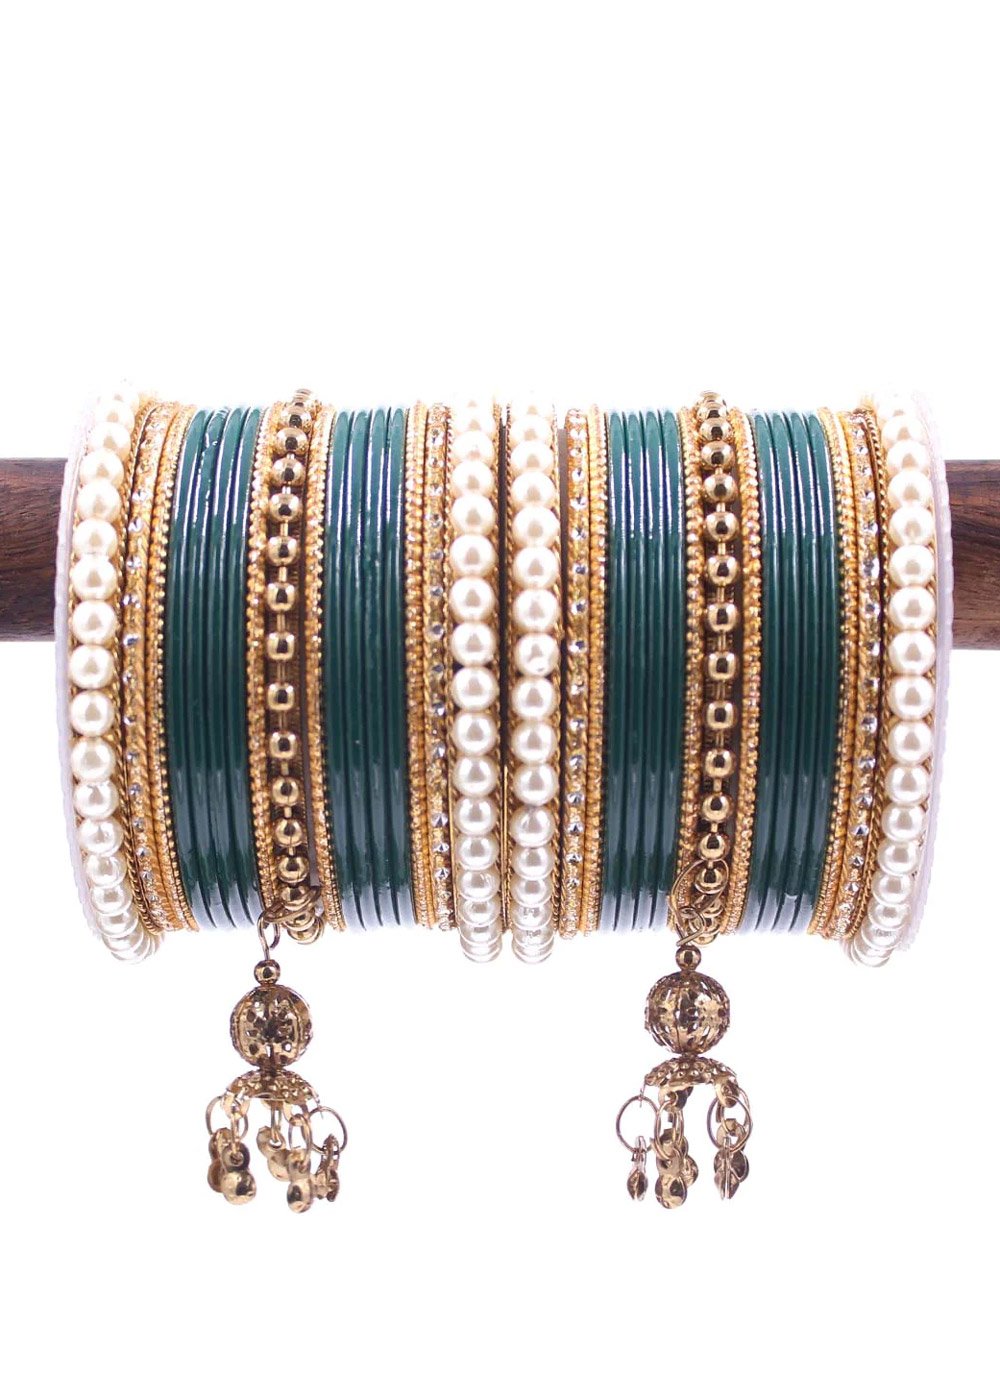 Unique Off White and Teal Alloy Bangles For Festival